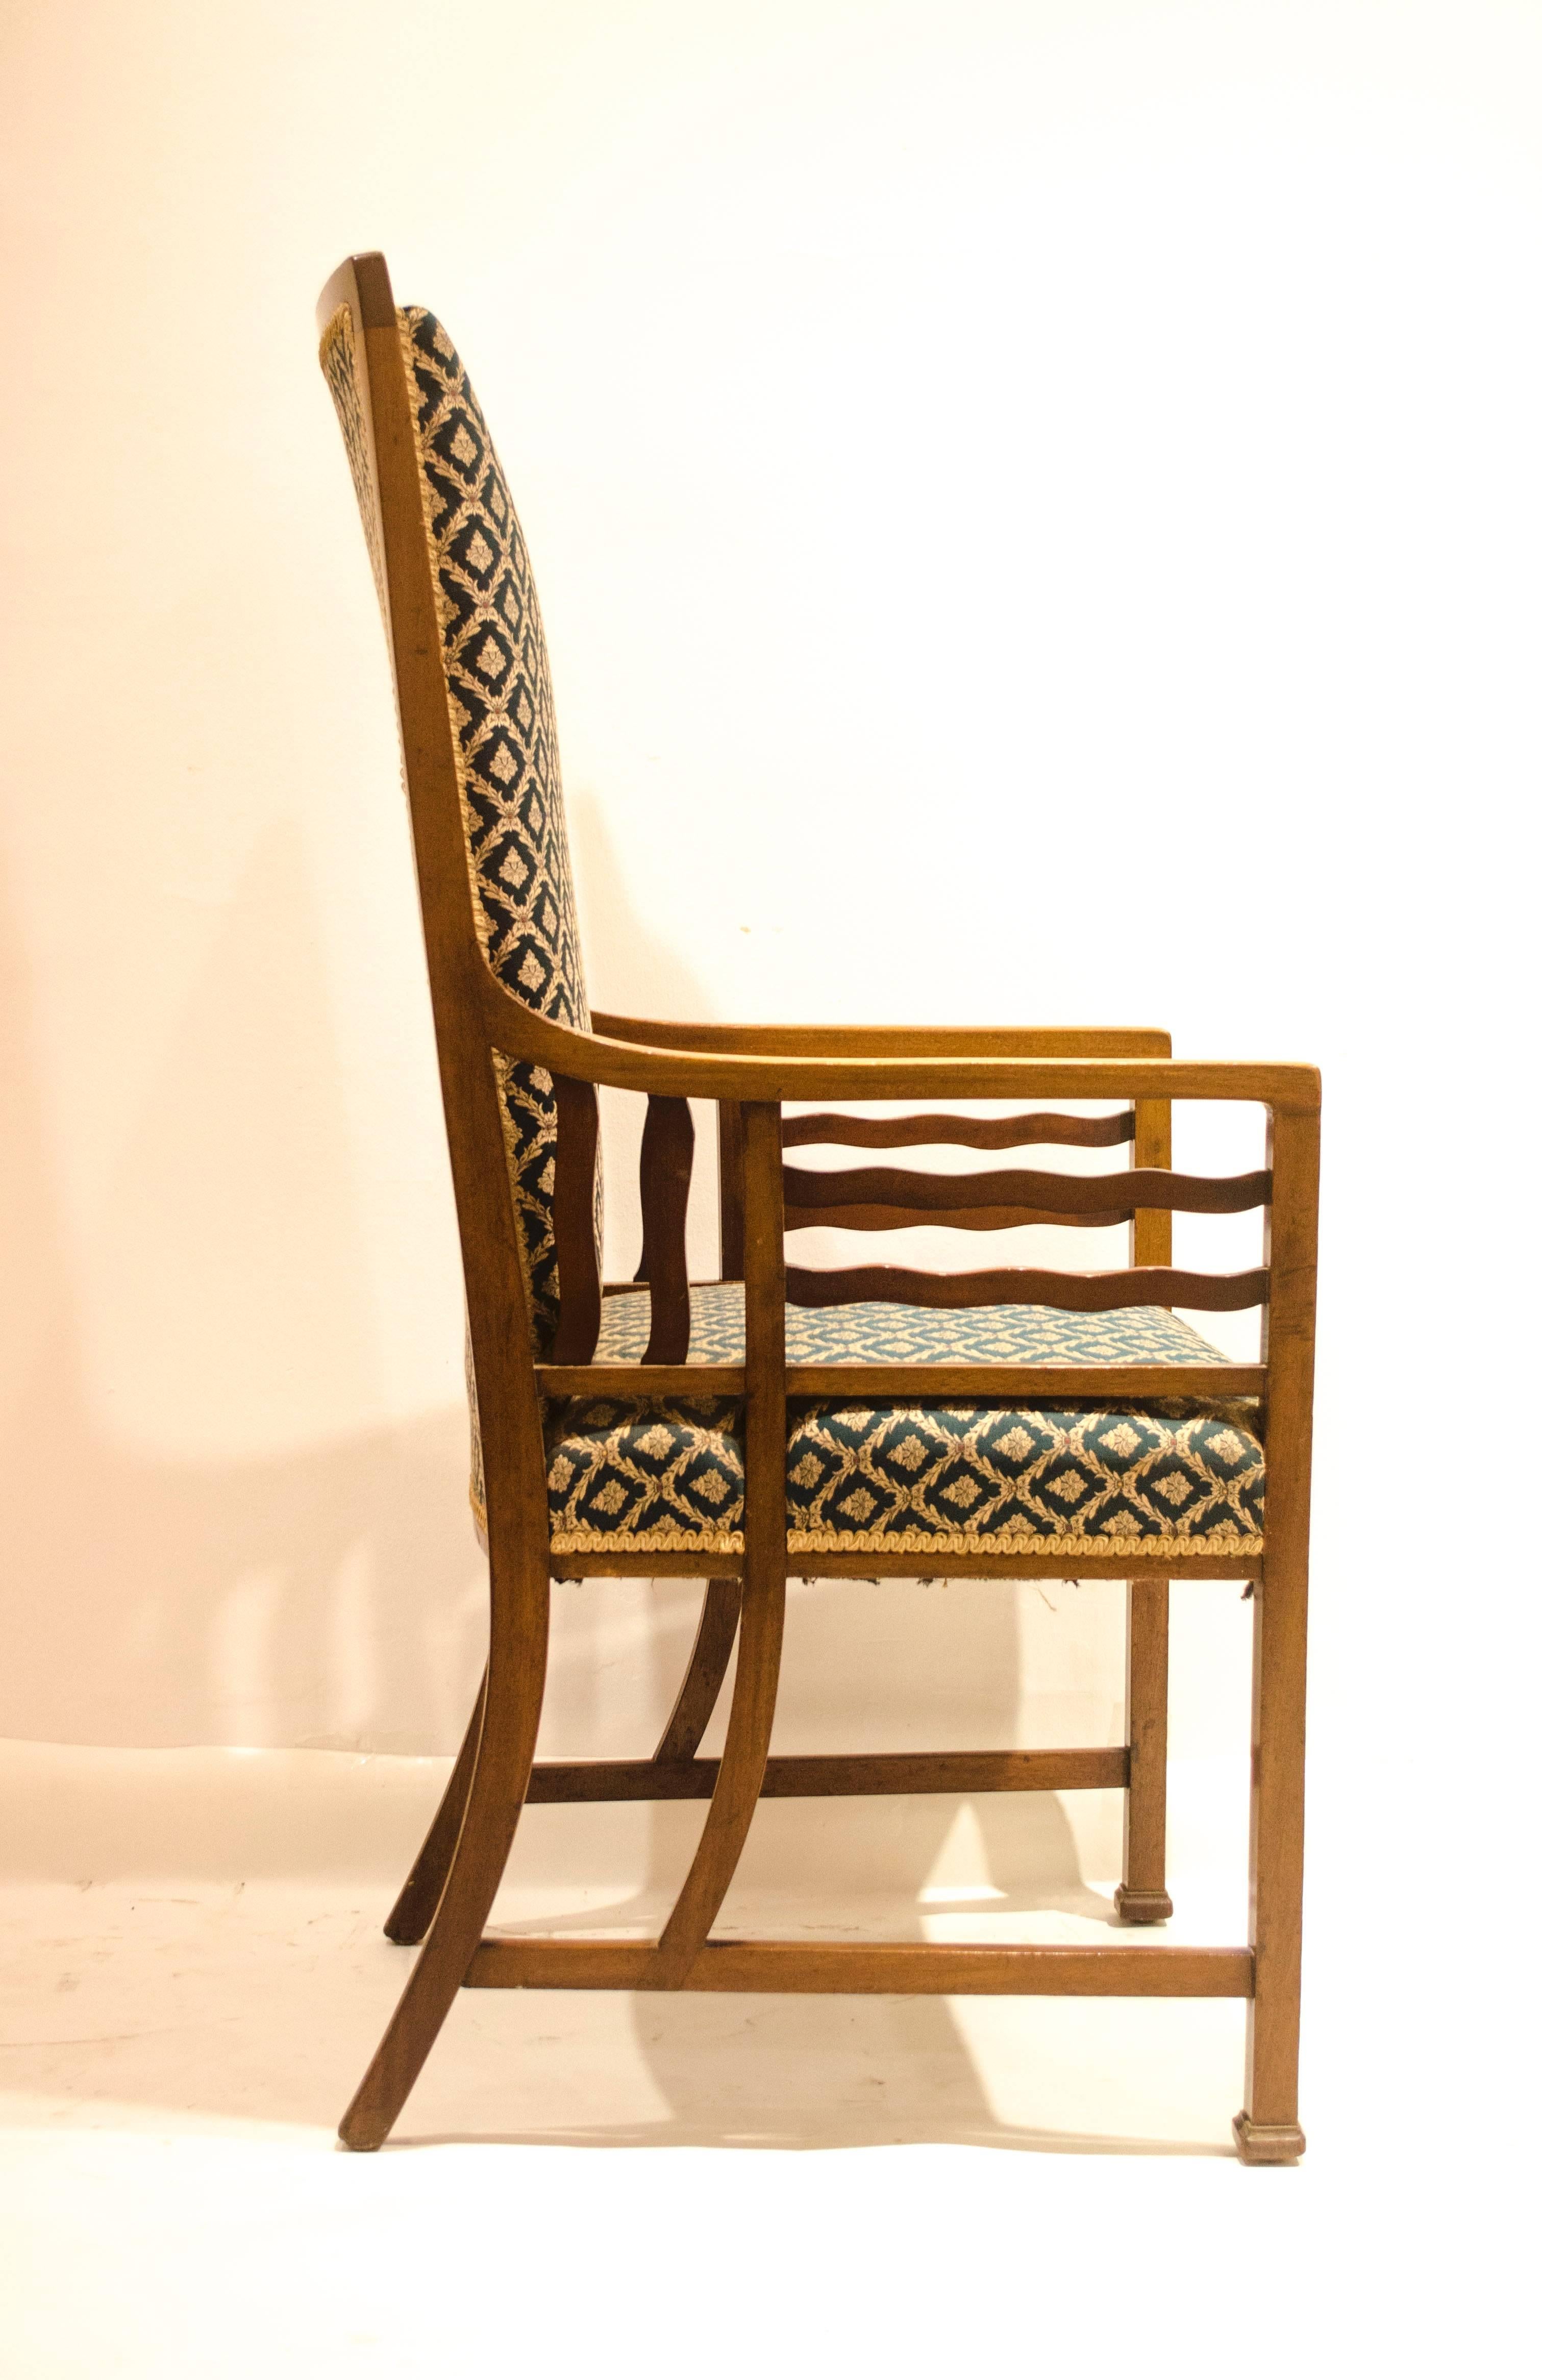 Liberty and Co. (attributed), an Anglo-Japanese walnut armchair with wavy arm supports and arms that follow through to the side stretchers.